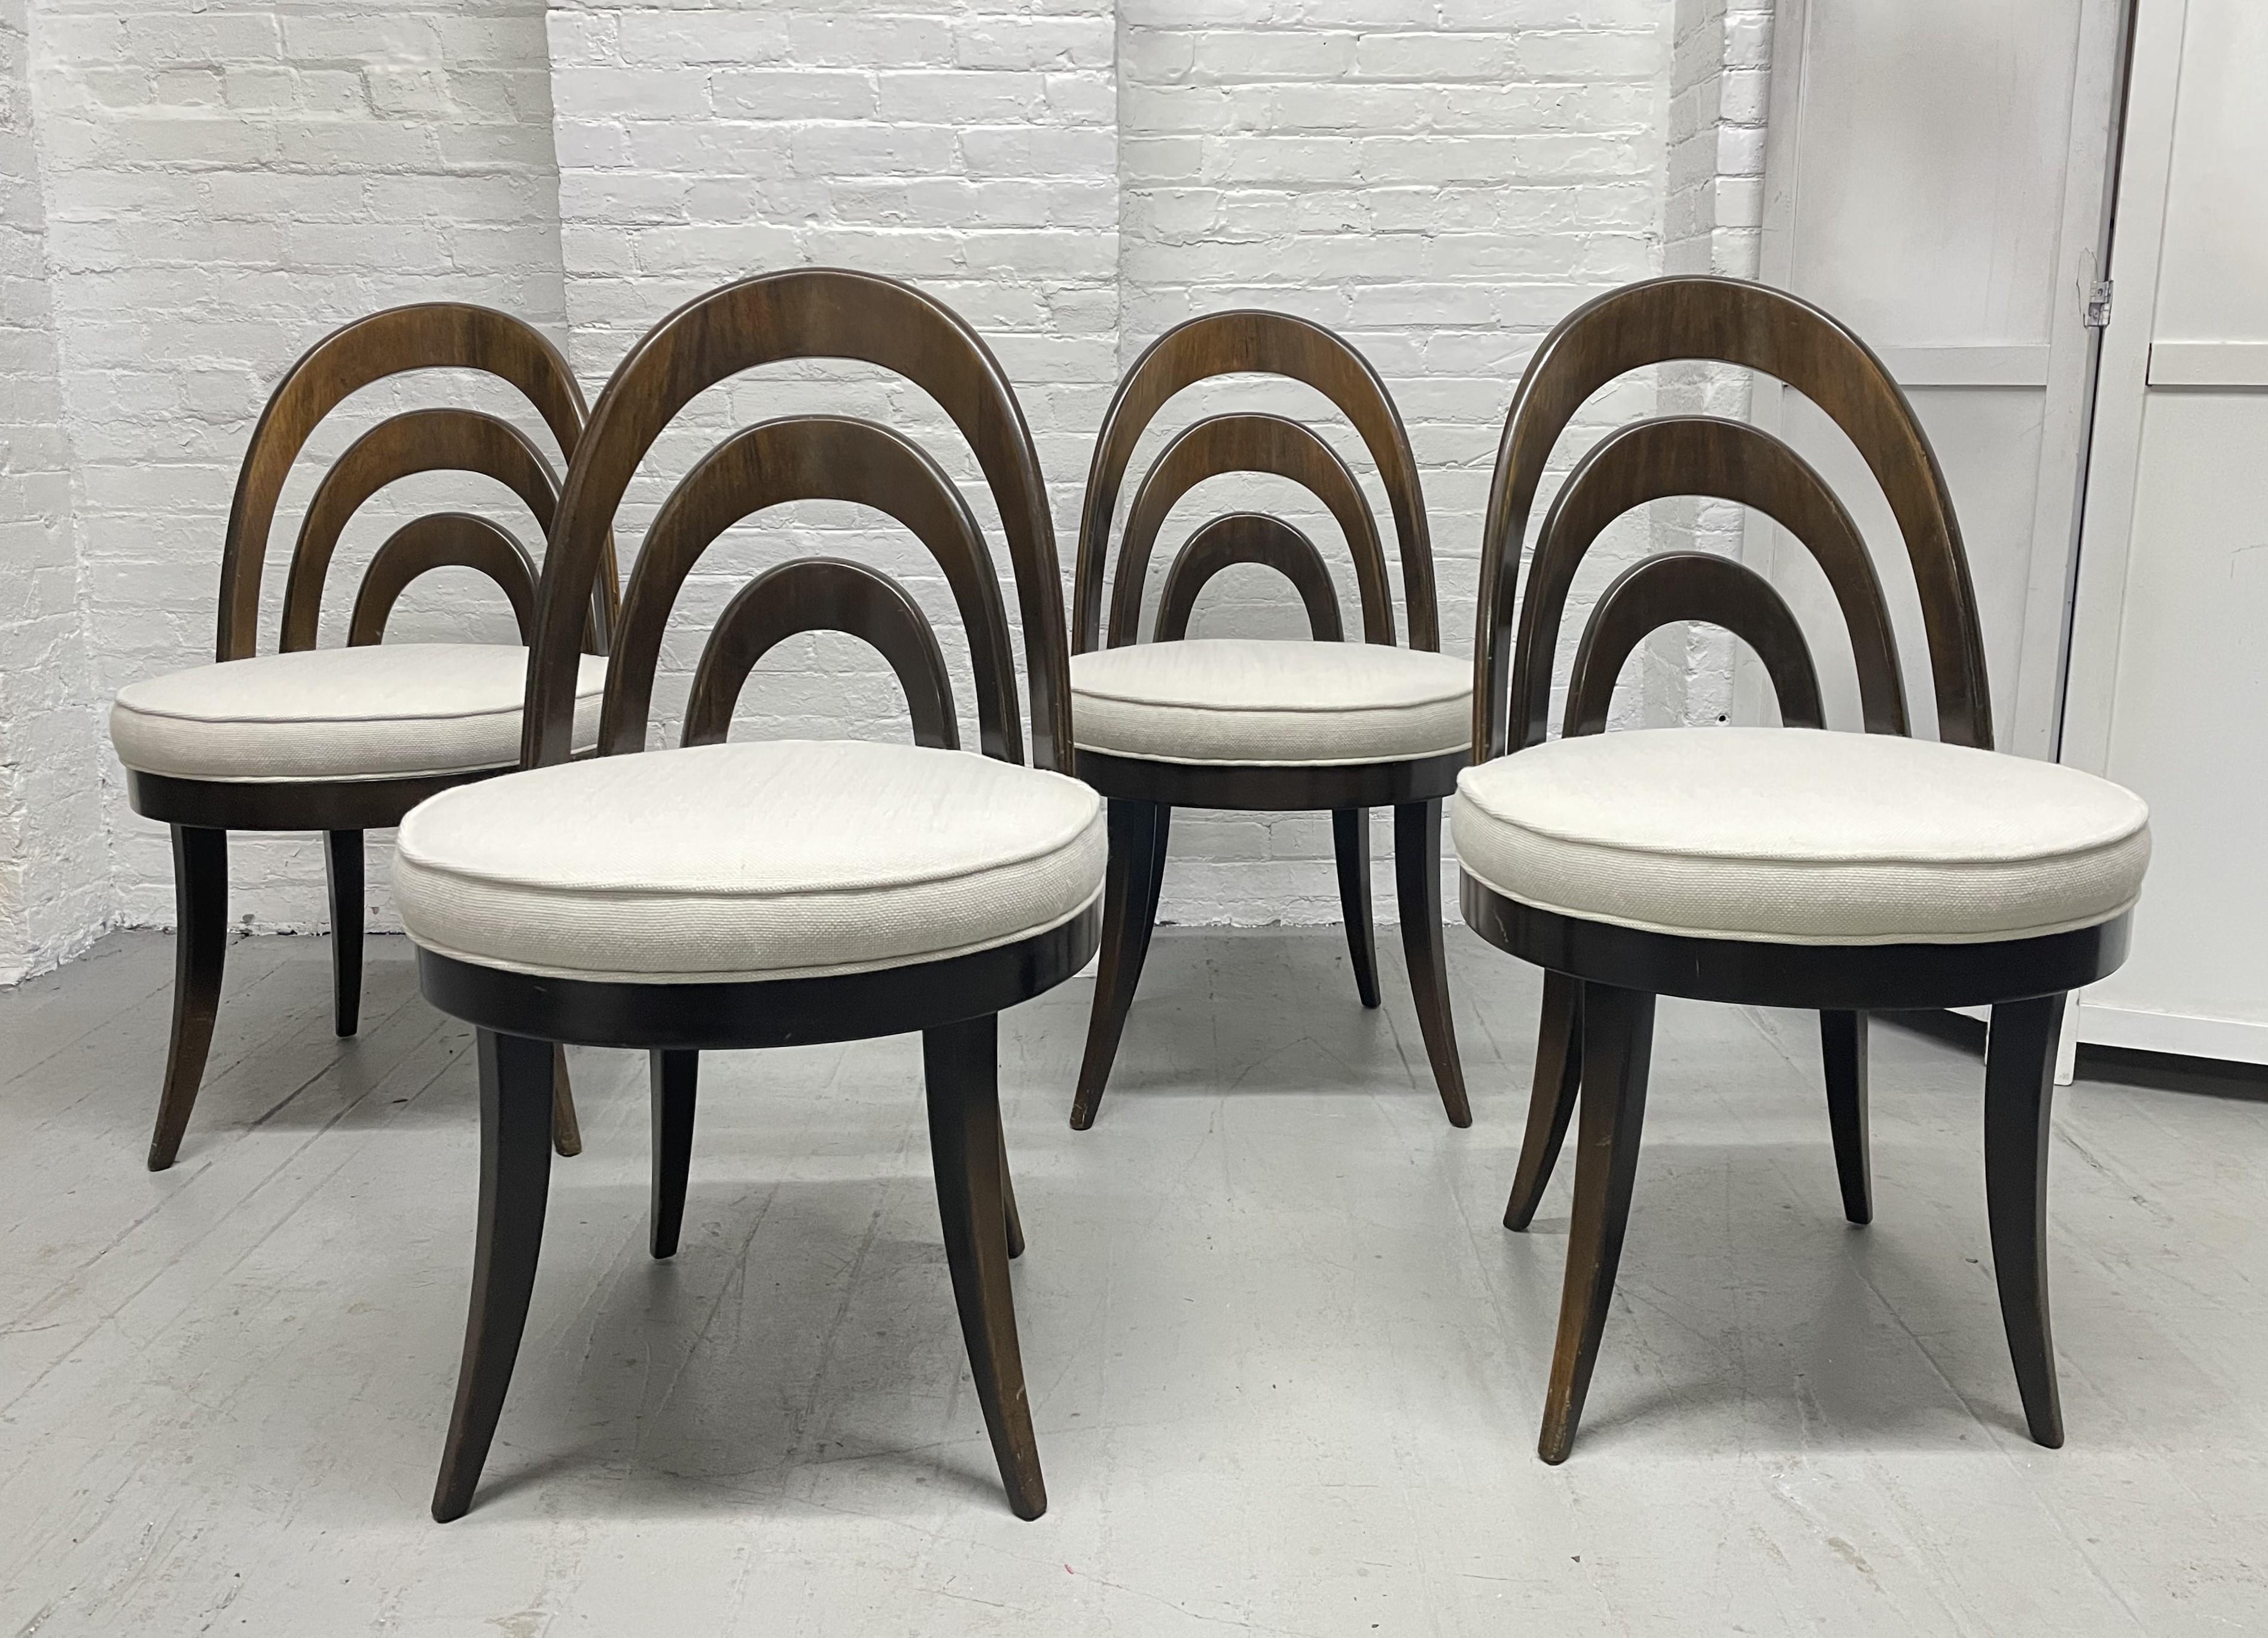 1950s Harvey Probber dining chairs. Nicely designed chairs with curved backs, splayed legs and newly fabric covered cushioned seats. Mahogany frames.